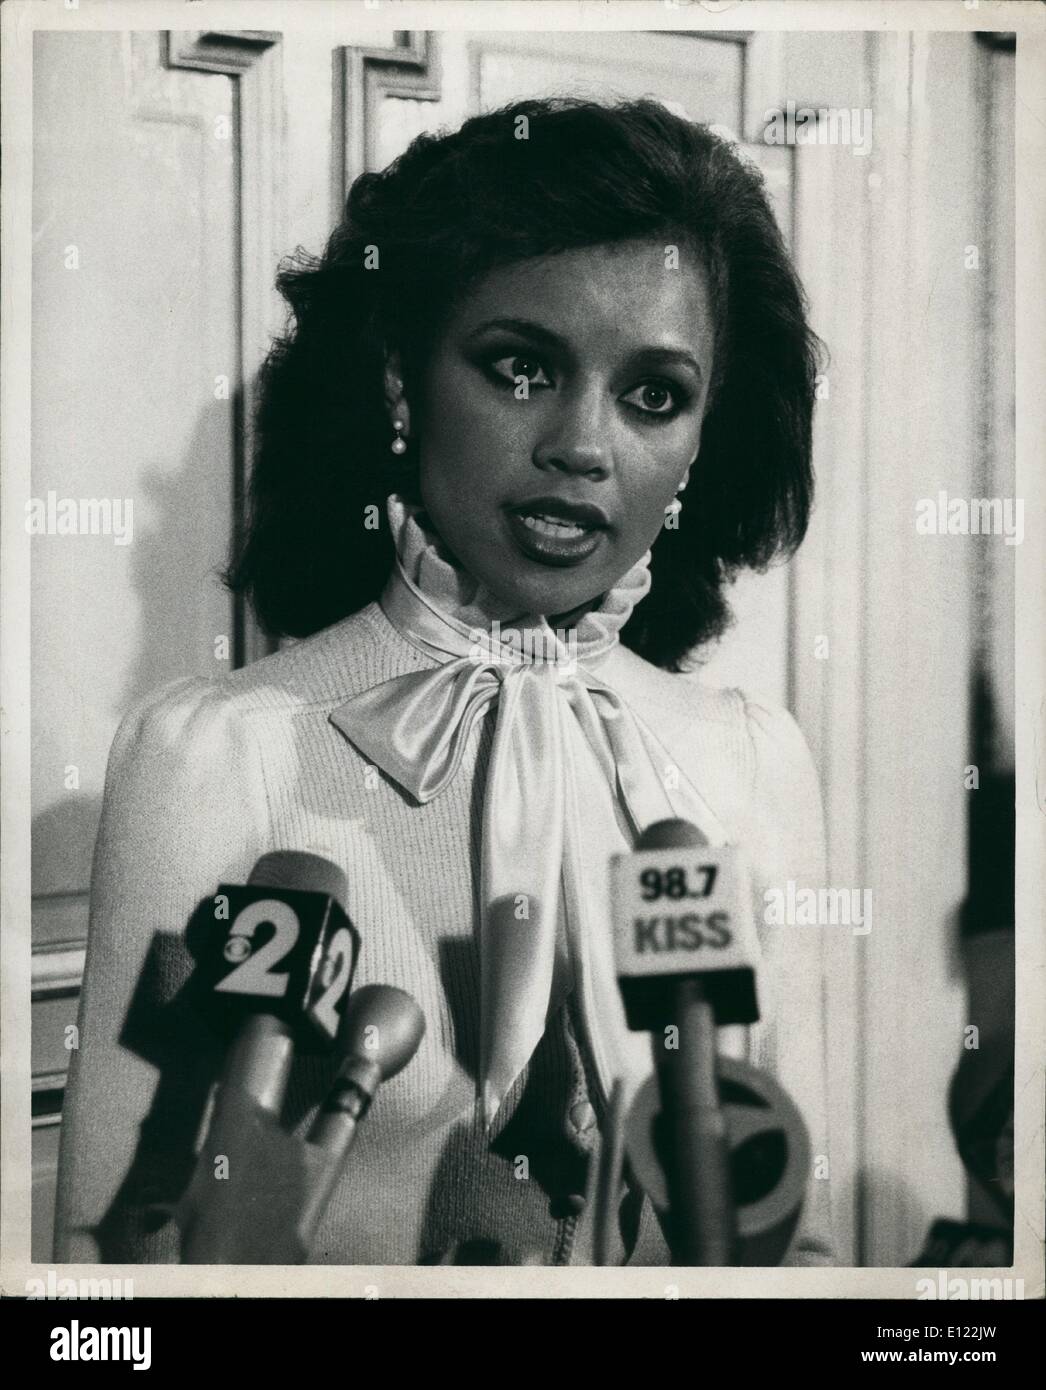 Sep 18, 1983 - New York, New York, U.S. - VANESSA WILLIAMS became the first black woman to win the Miss America Beauty Pageant in the 63 year history of the event. Miss Williams is a 20 year old musical theater Major at Syracuse University in New York State. PICTURED: Miss Williams at a press conference in New York. Stock Photo